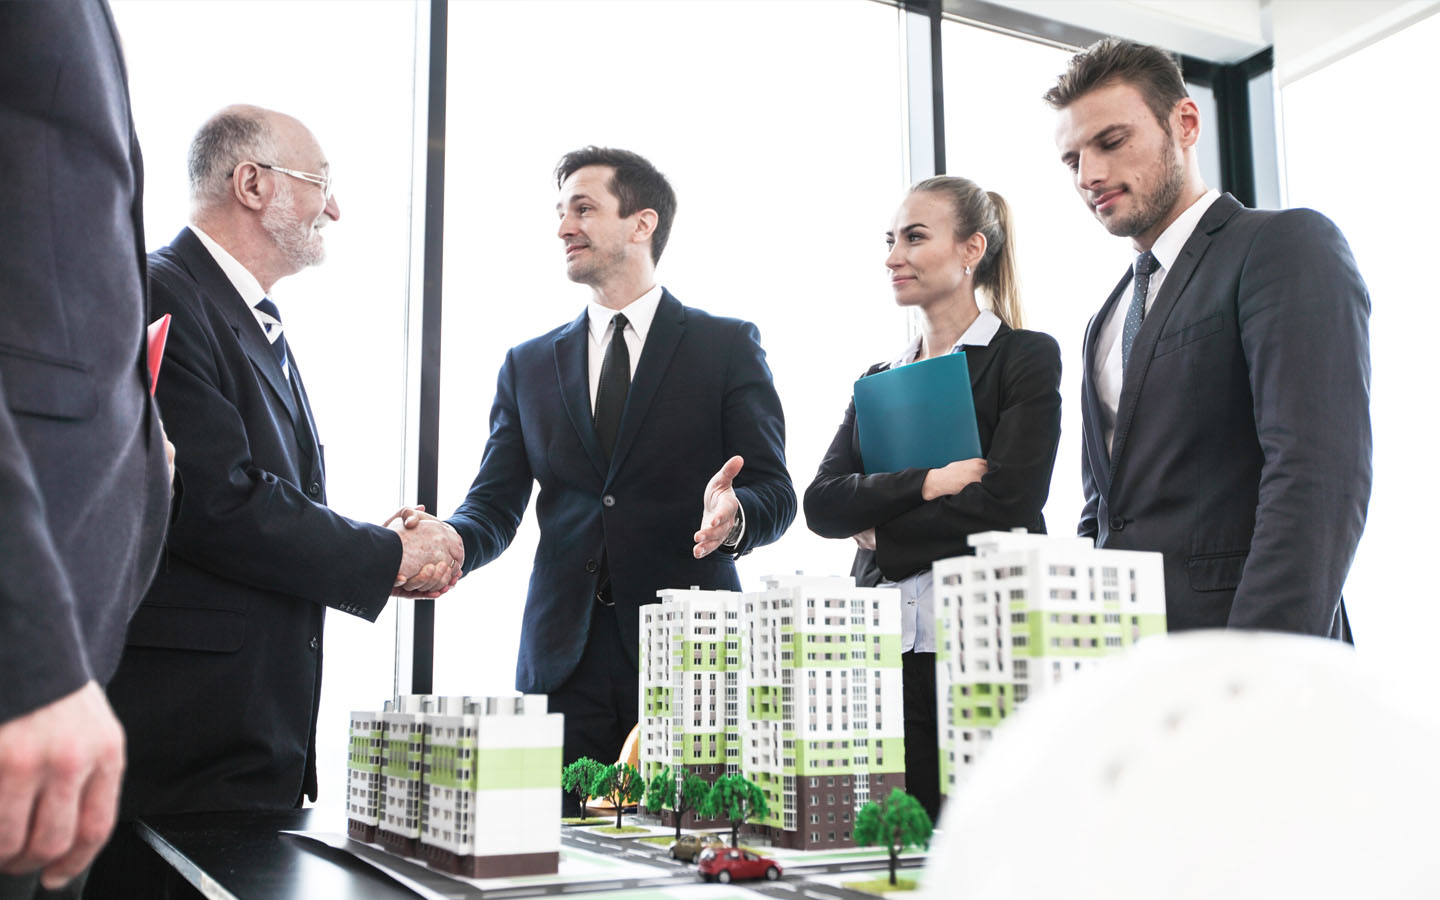 business people finalising deal with a property model placed on table. want to learn how to start a real estate business? start by studying the market